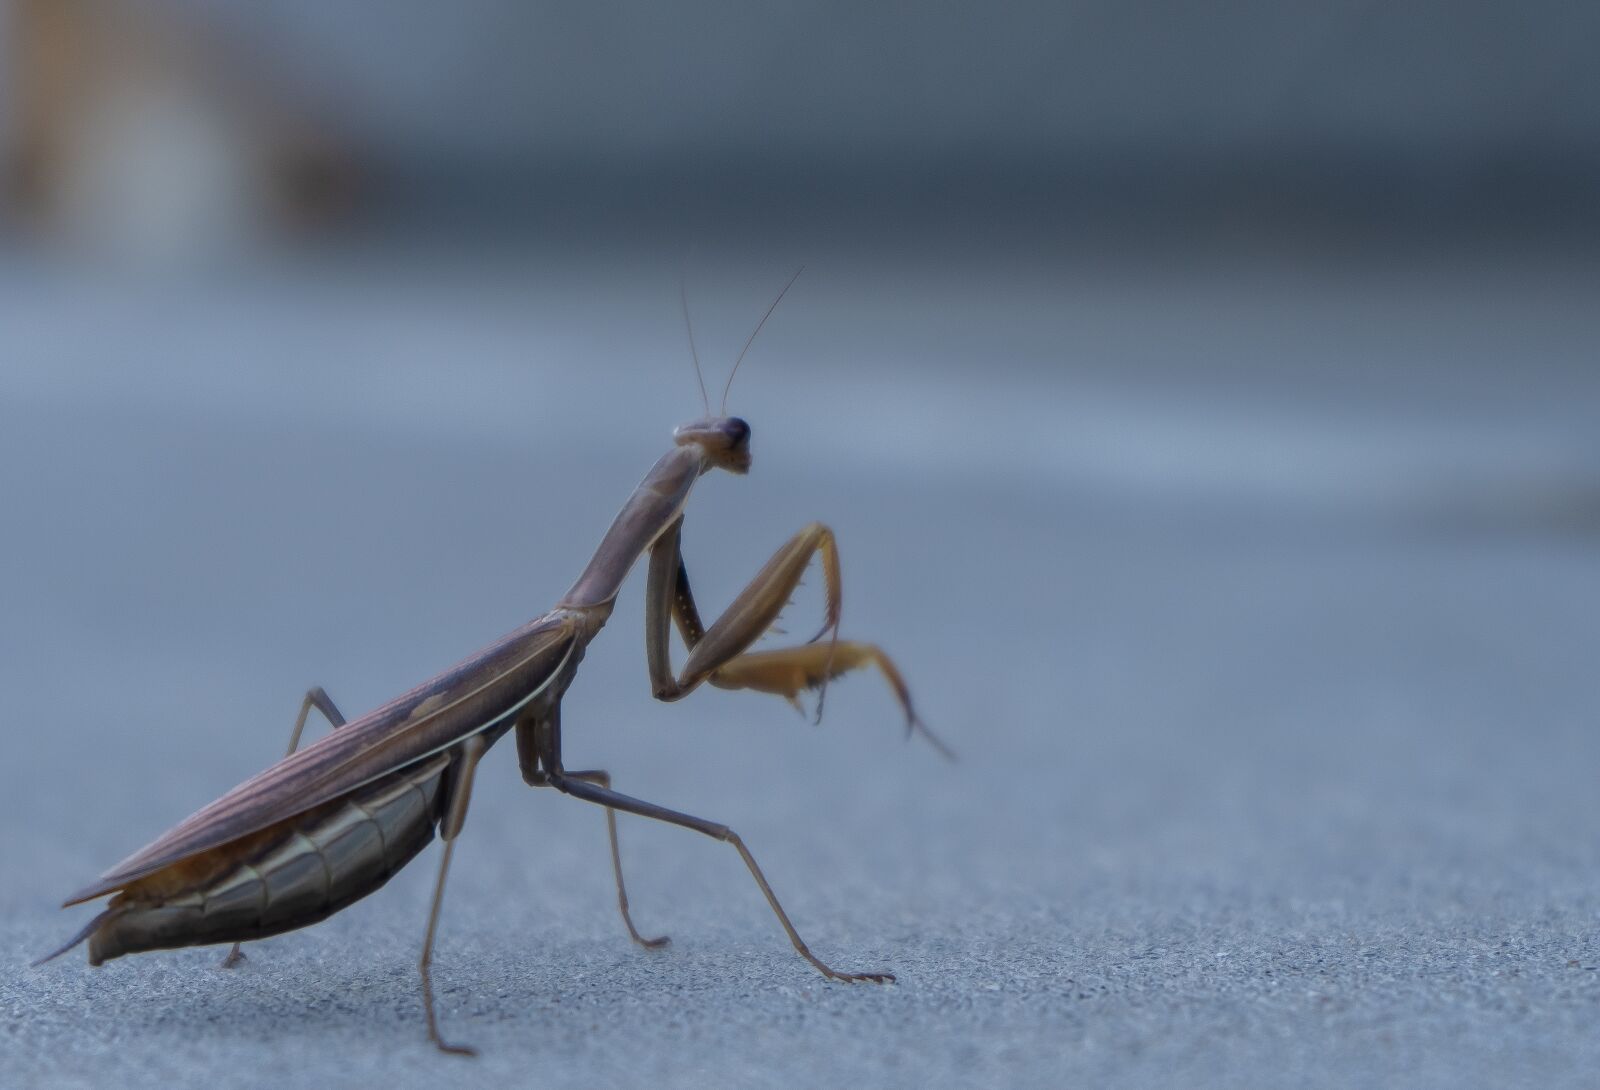 Sony a7 II + Sony FE 28-70mm F3.5-5.6 OSS sample photo. Praying mantis, bugs, insect photography